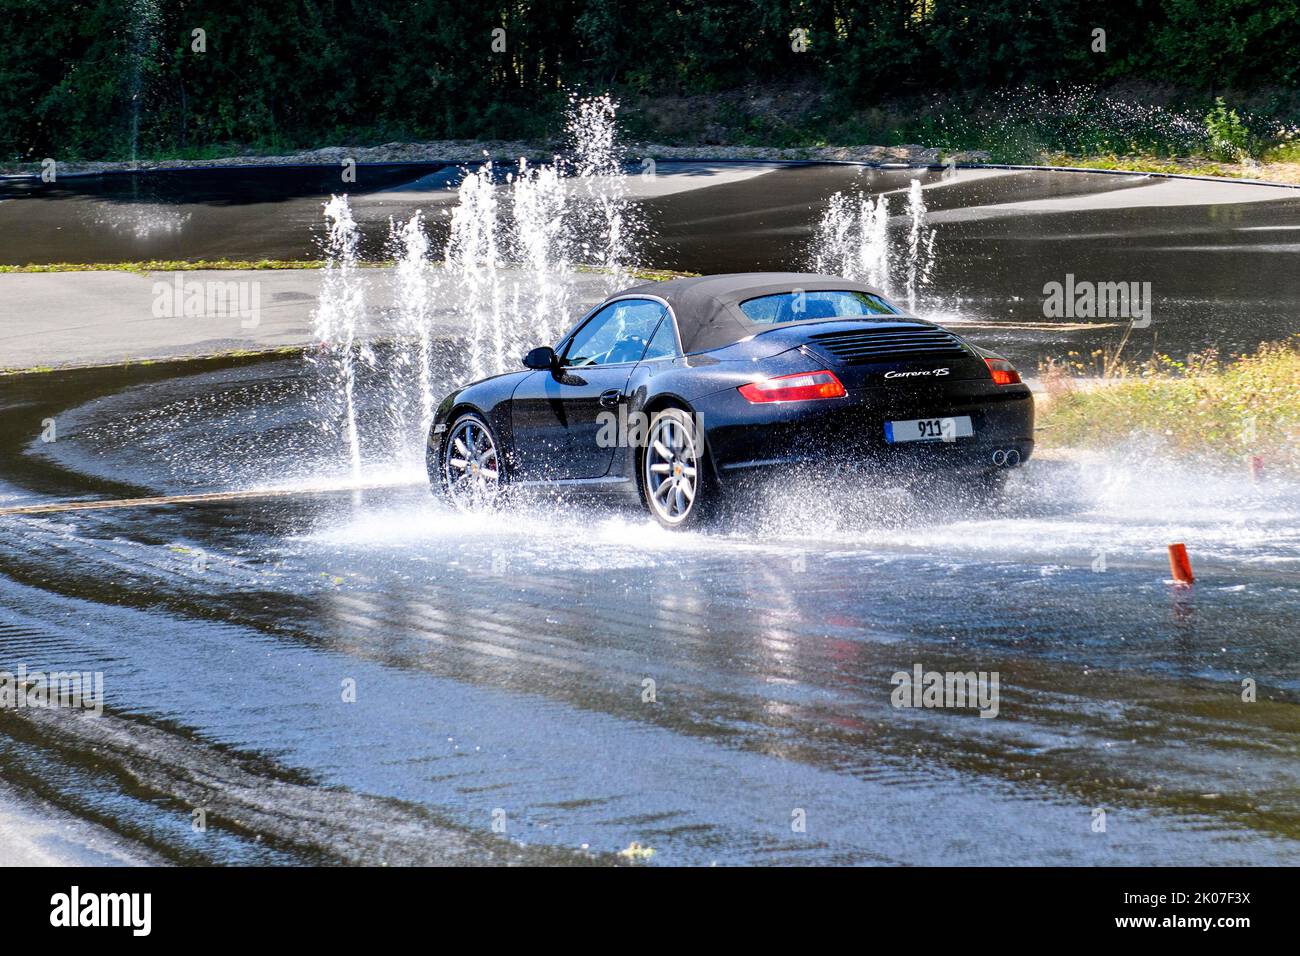 Sports car with all-wheel drive Porsche 911 Carrera 4s drives at 50 kmh speed on sloping heavily watered wet road towards obstacle from water Stock Photo